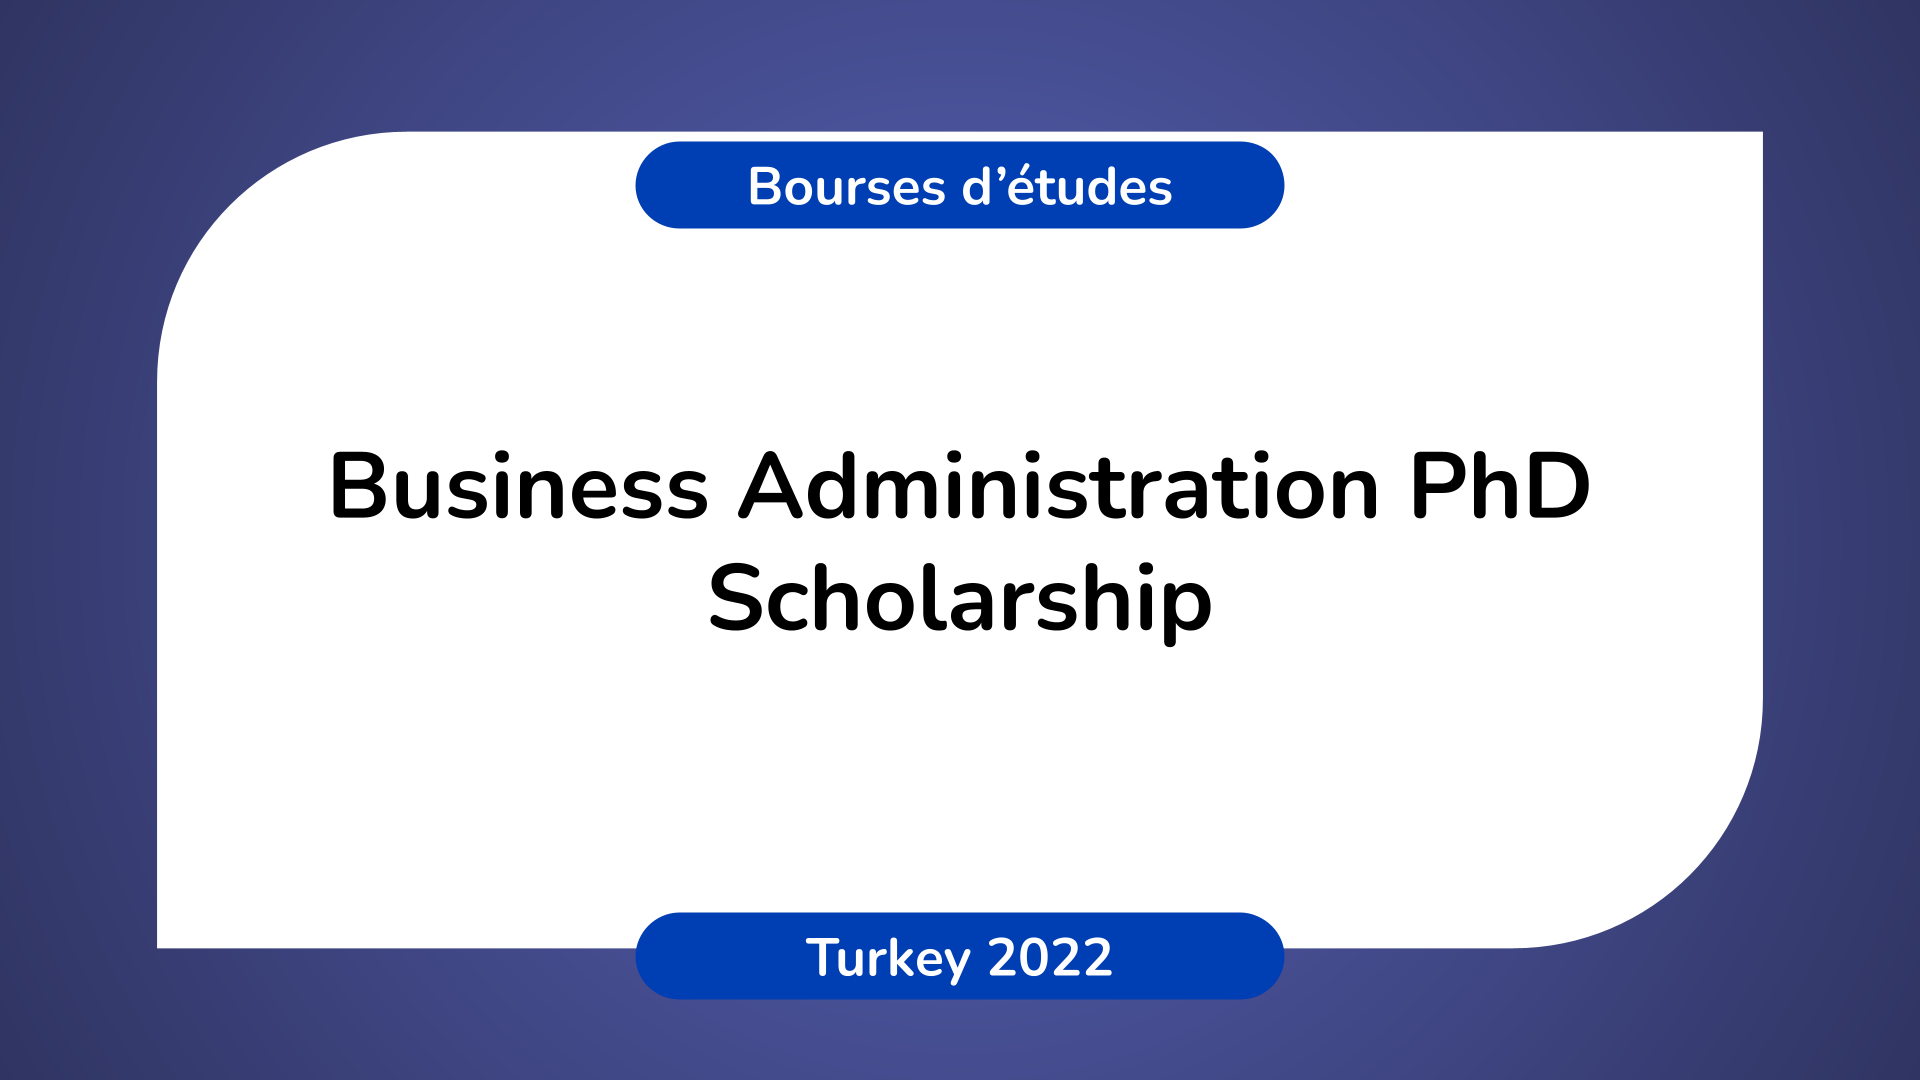 phd business administration in turkey